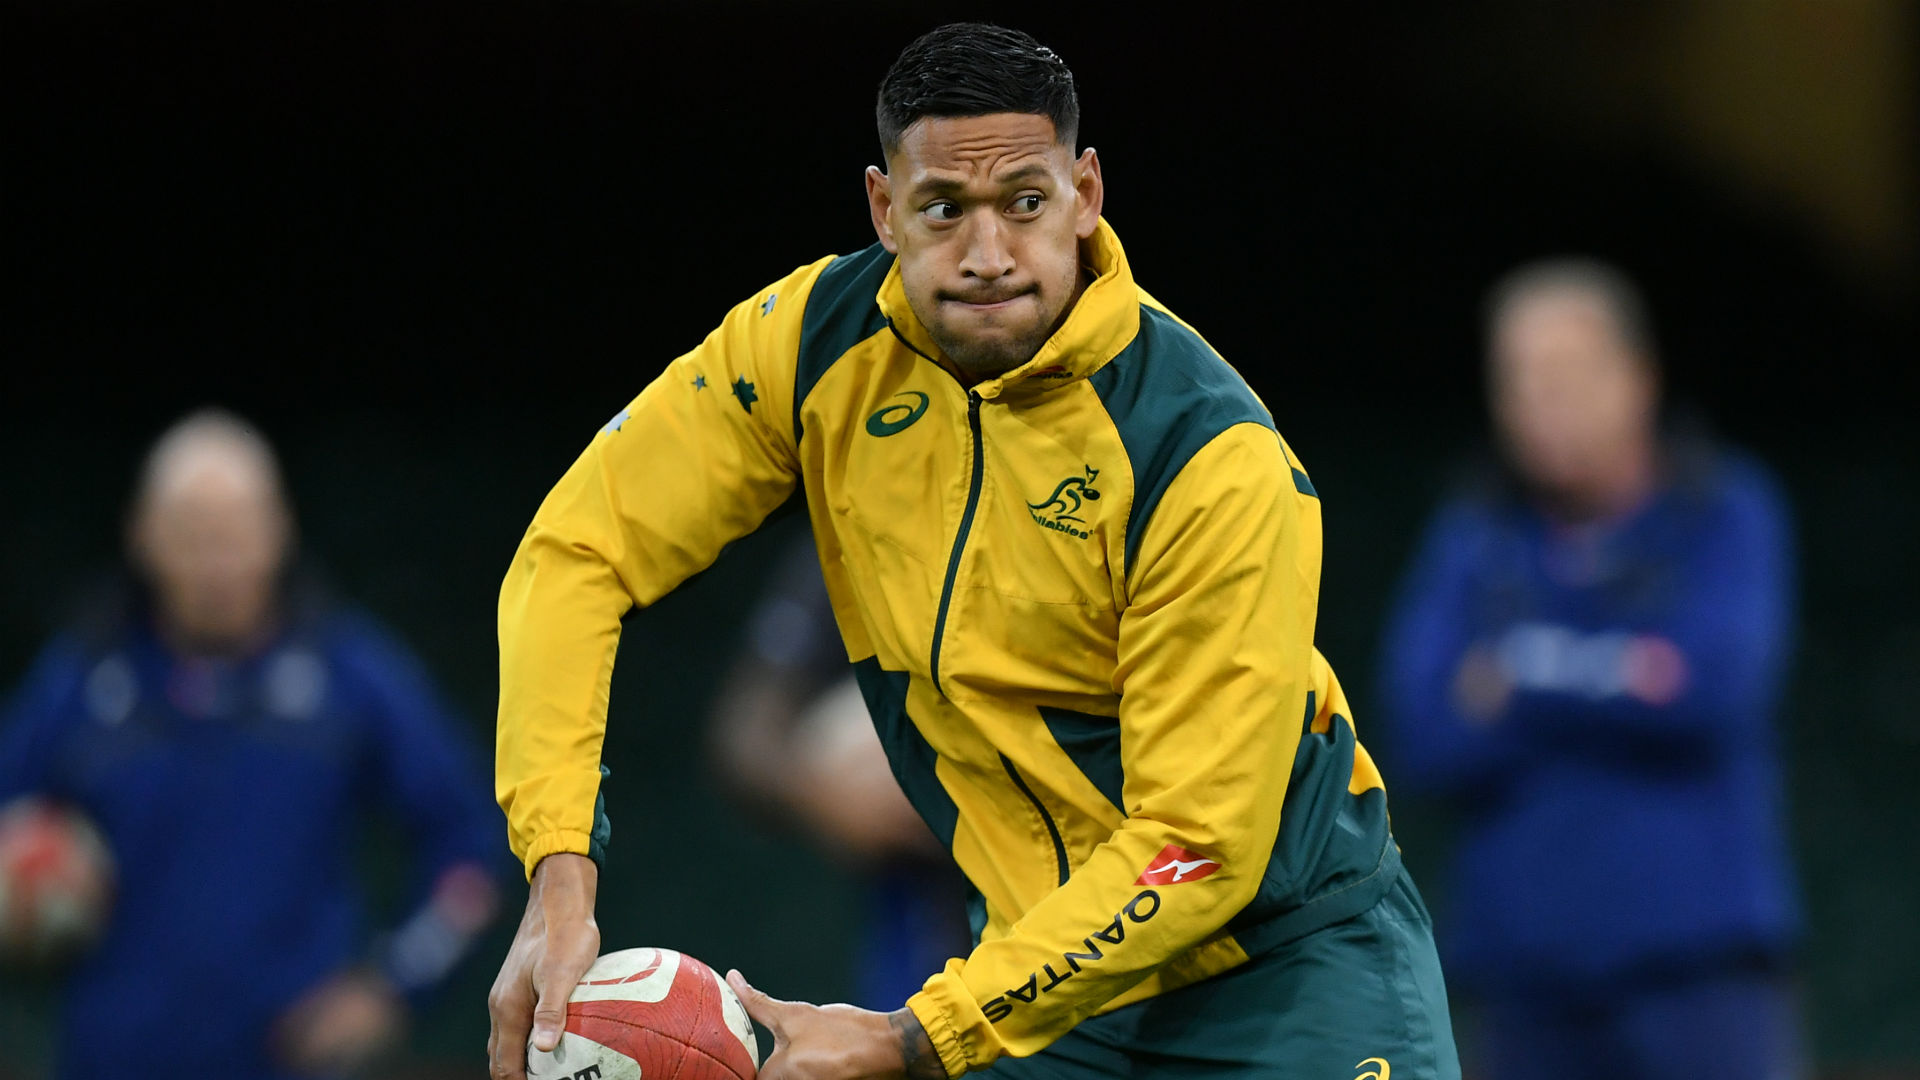 A round of talks between Israel Folau and Rugby Australia have ended without agreement, but the player is optimistic.